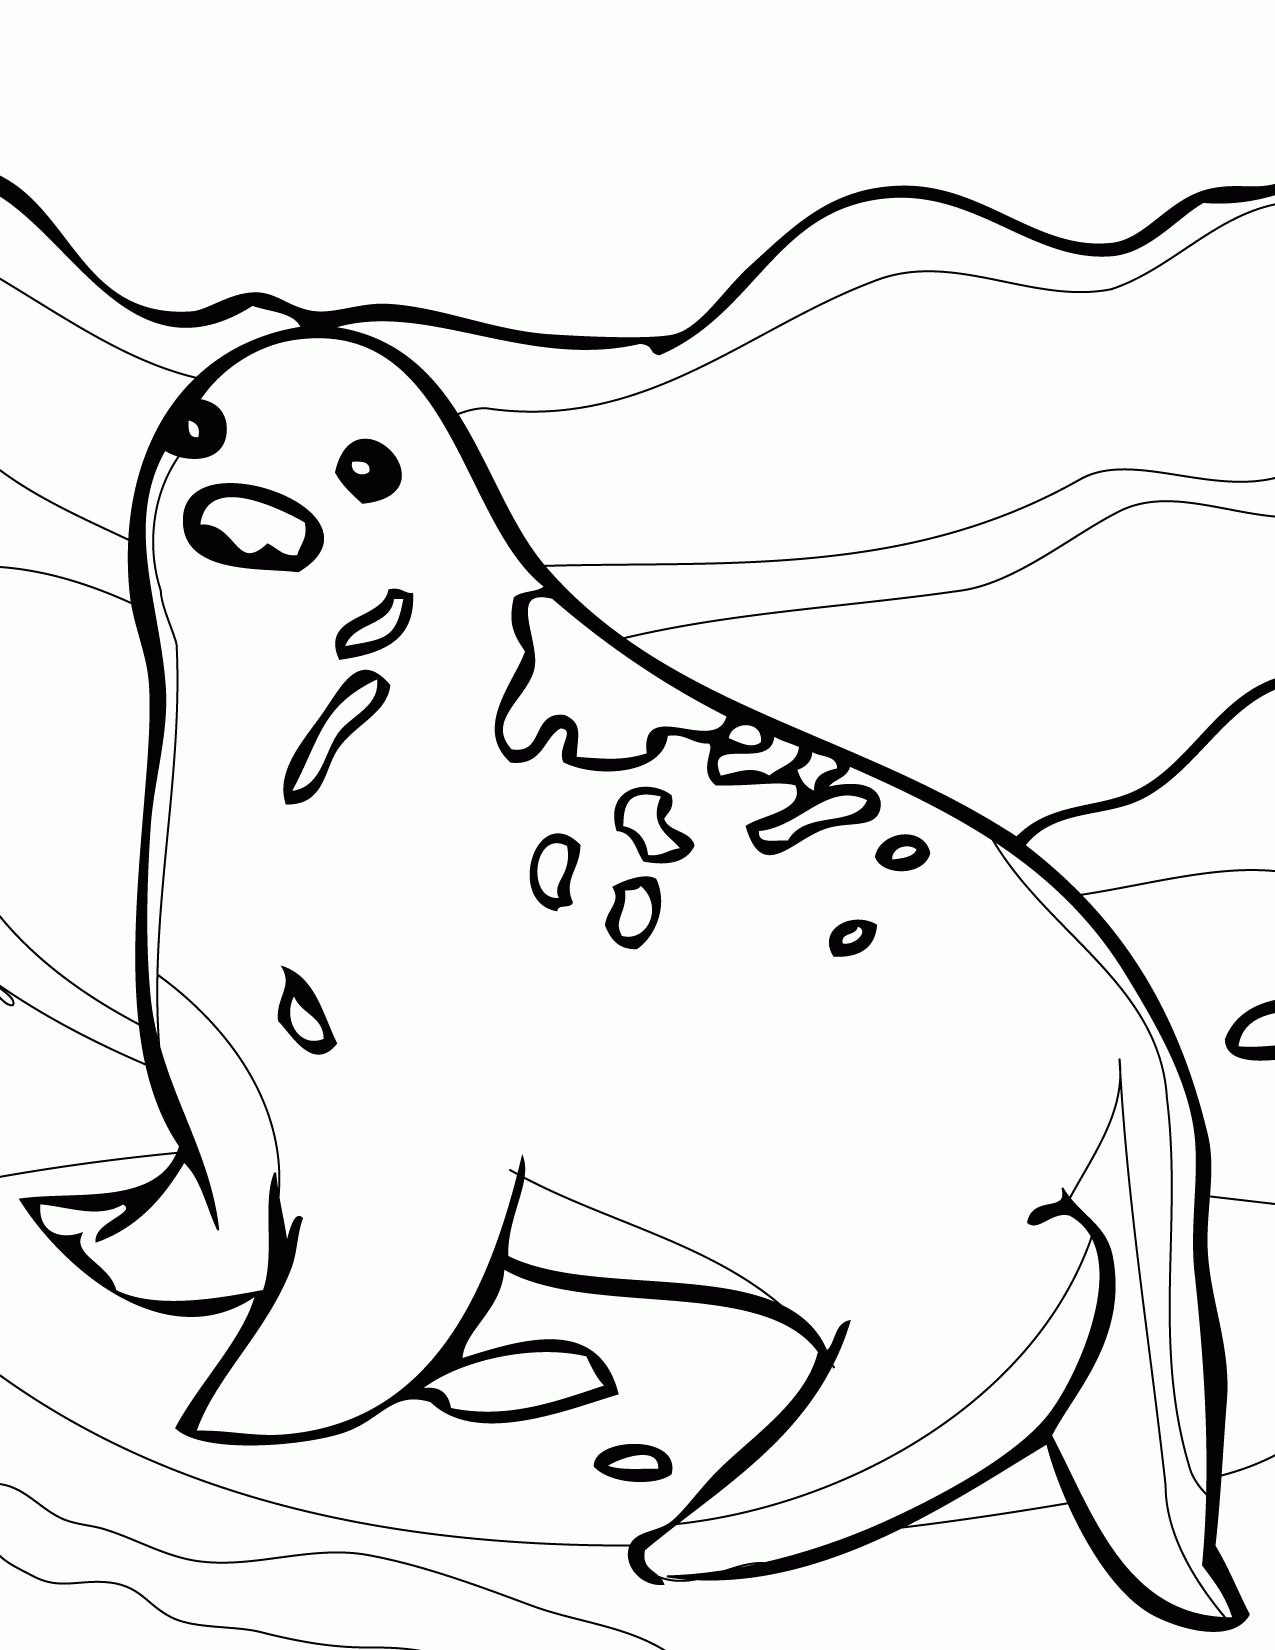 Inspiring Arctic Animal Coloring Pages Best Ideas